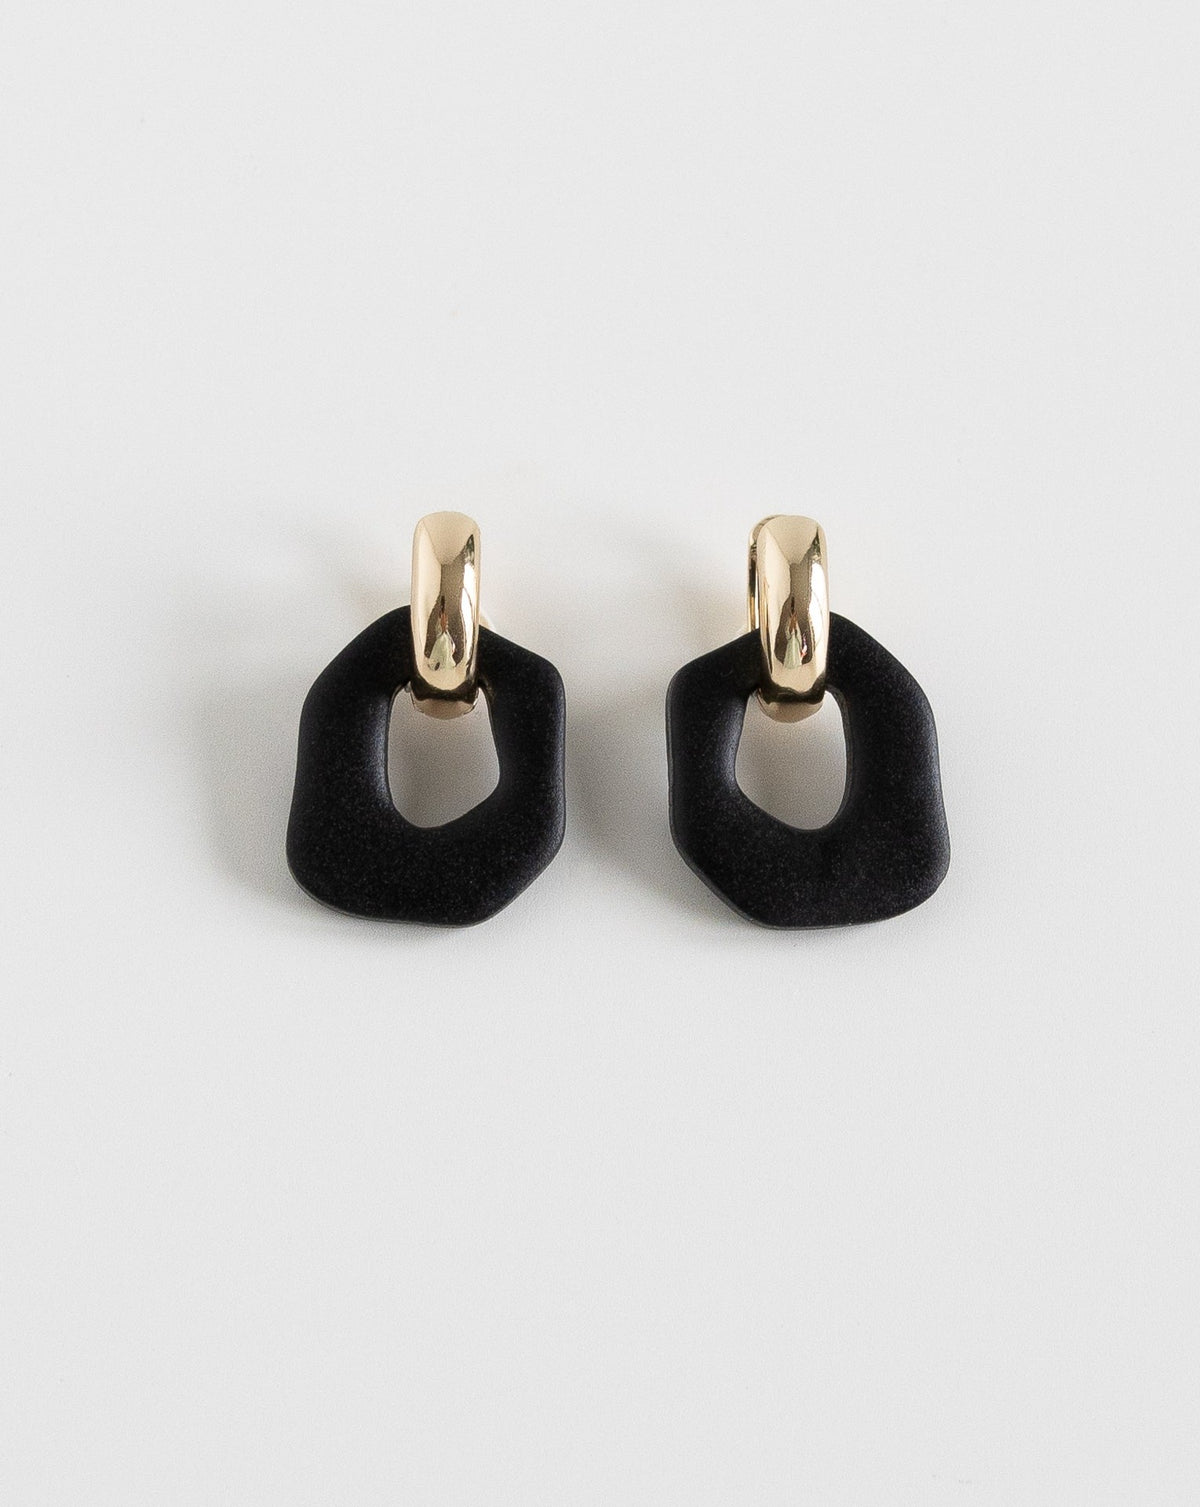 Darien earrings in Black color with gold hoops, front view